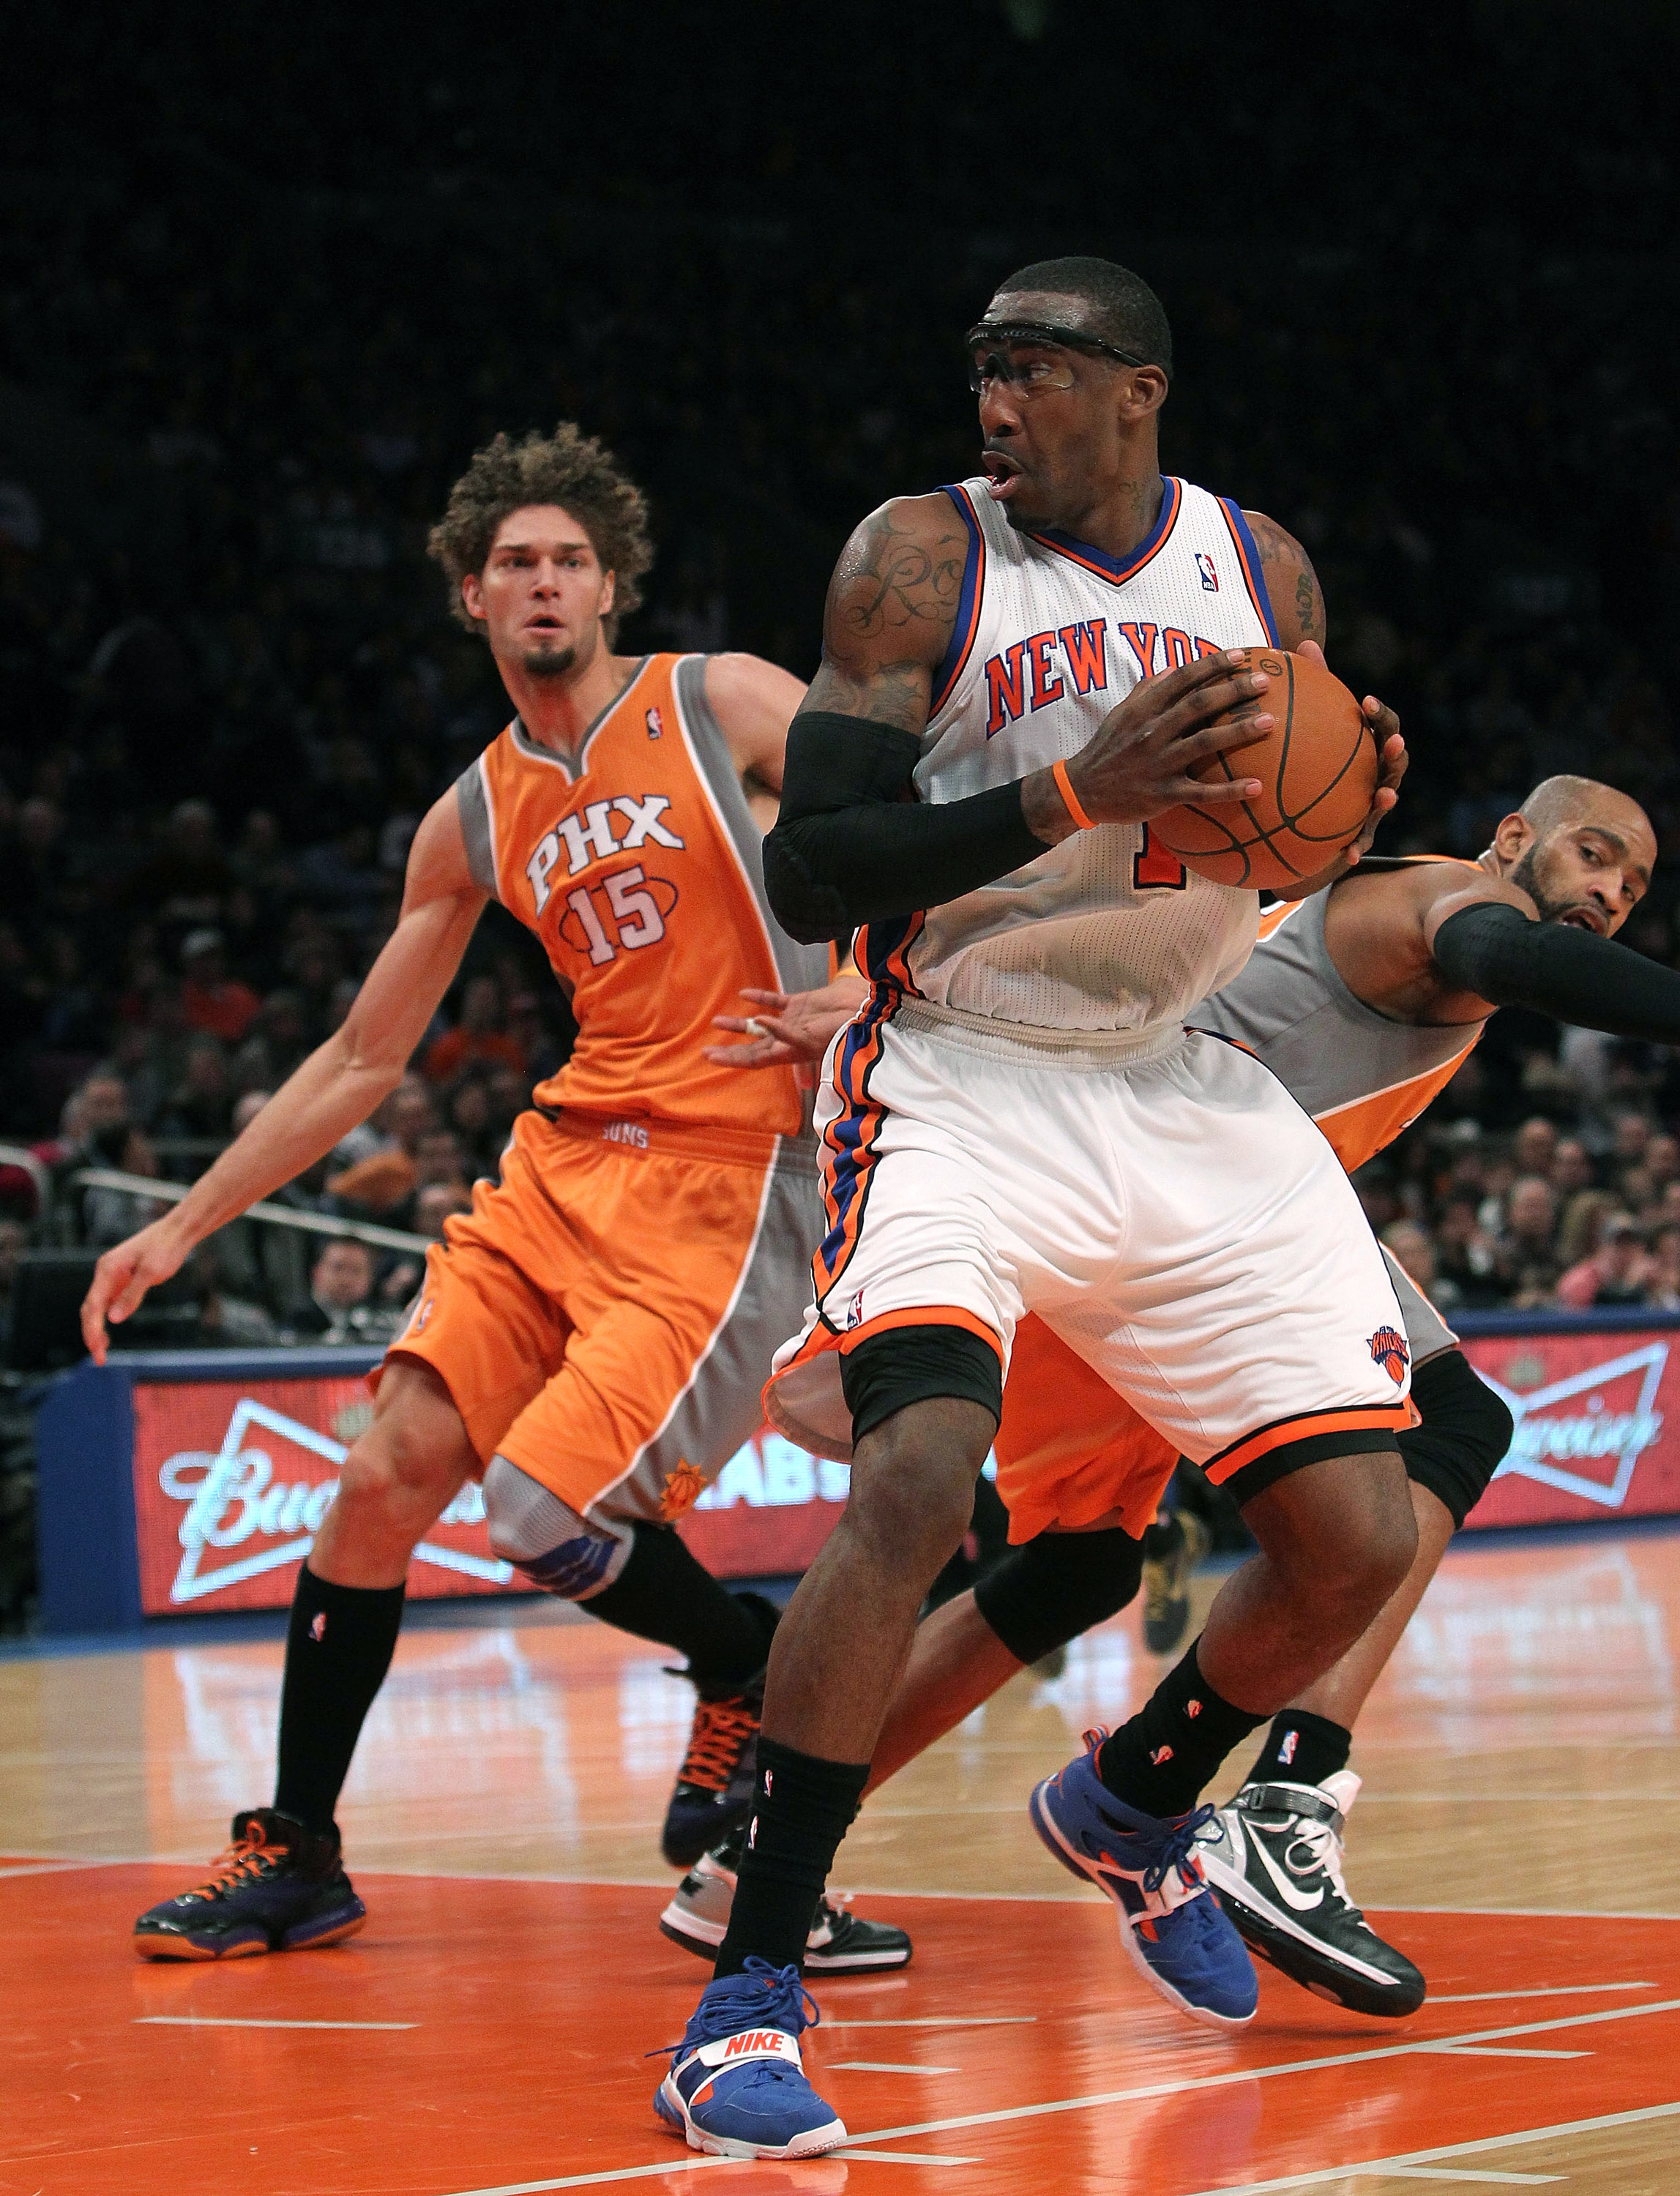 NEW YORK, NY - JANUARY 17:  Amar'e Stoudemire #1 of the New York Knicks goes to the basket against the Phoenix Suns at Madison Square Garden on January 17, 2011 in New York City. NOTE TO USER: User expressly acknowledges and agrees that, by downloading an